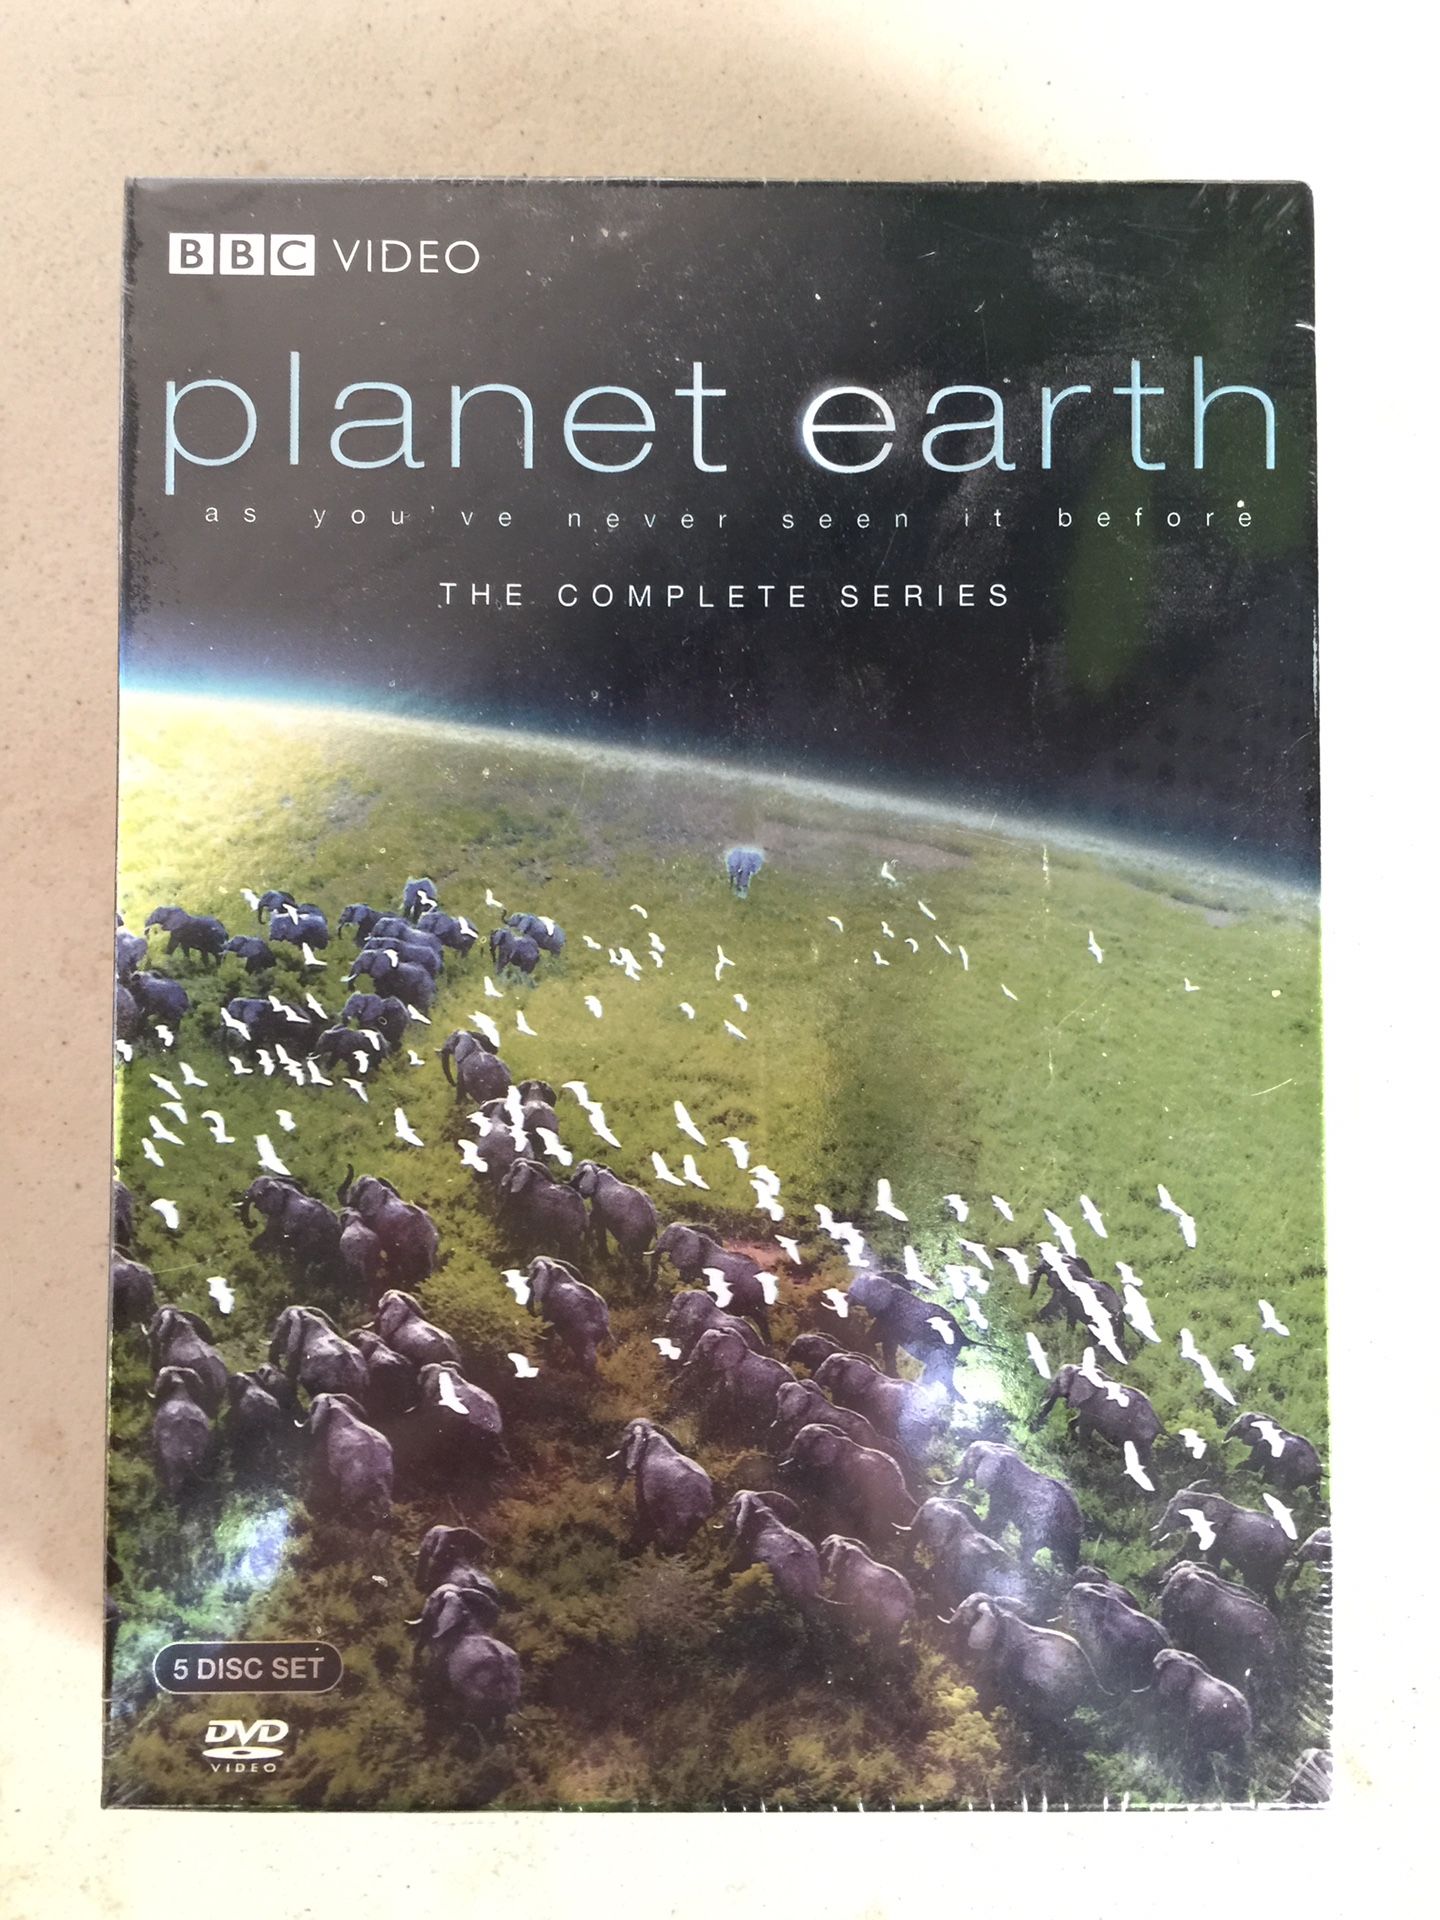 BBC Planet Earth complete series - unopened